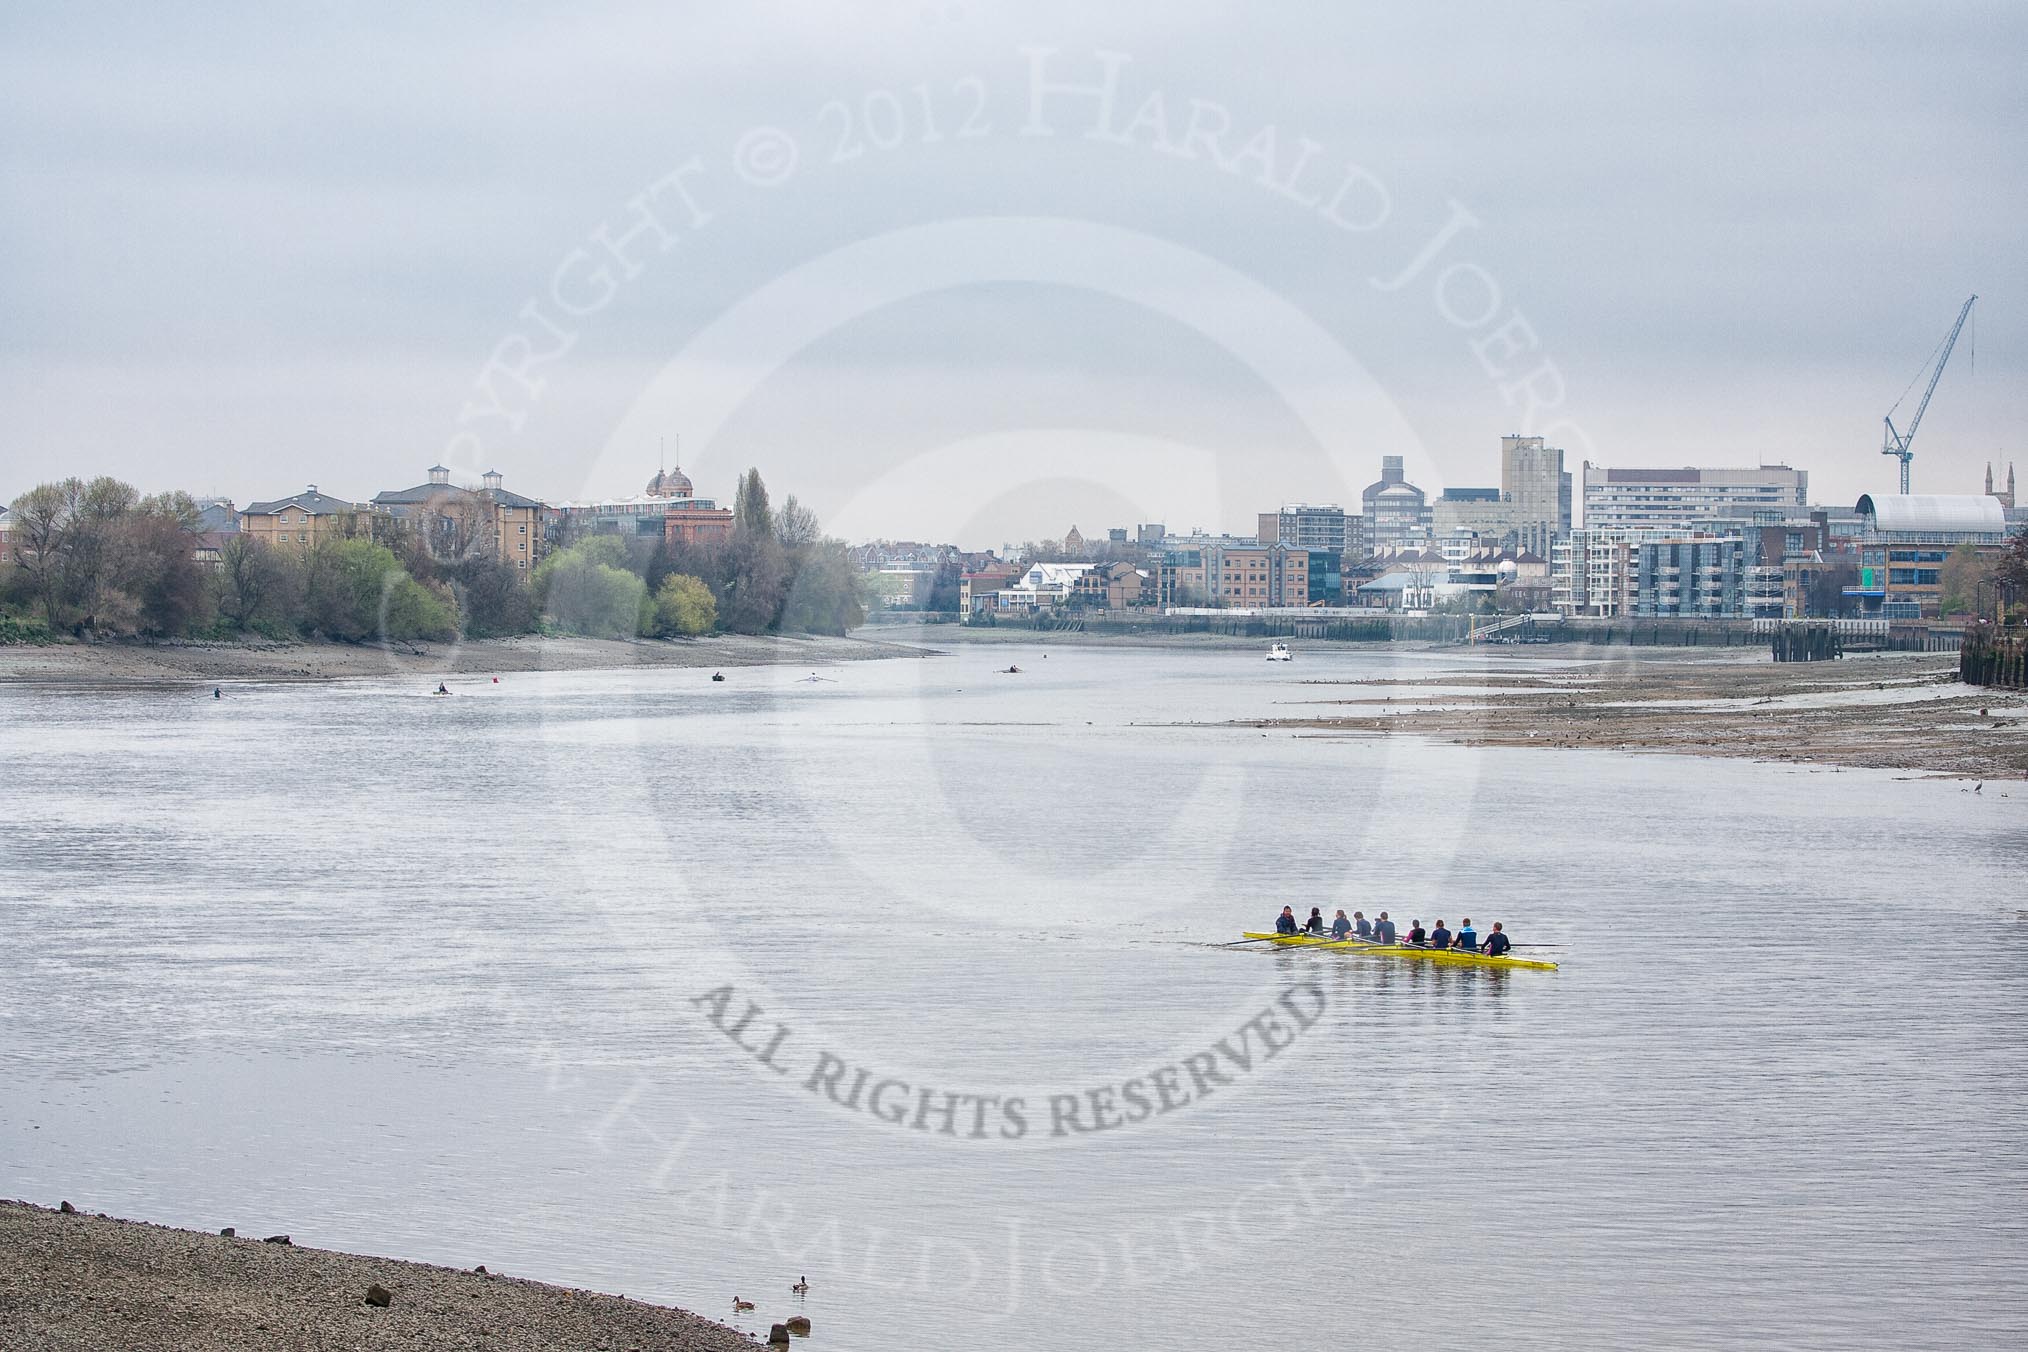 The Boat Race 2012: Setting the scene for the 2012 Boat Race:  The River Thames, seen in the direction of the Boat Race, at low tide. On the left the Harrods Repository..




on 07 April 2012 at 09:48, image #16